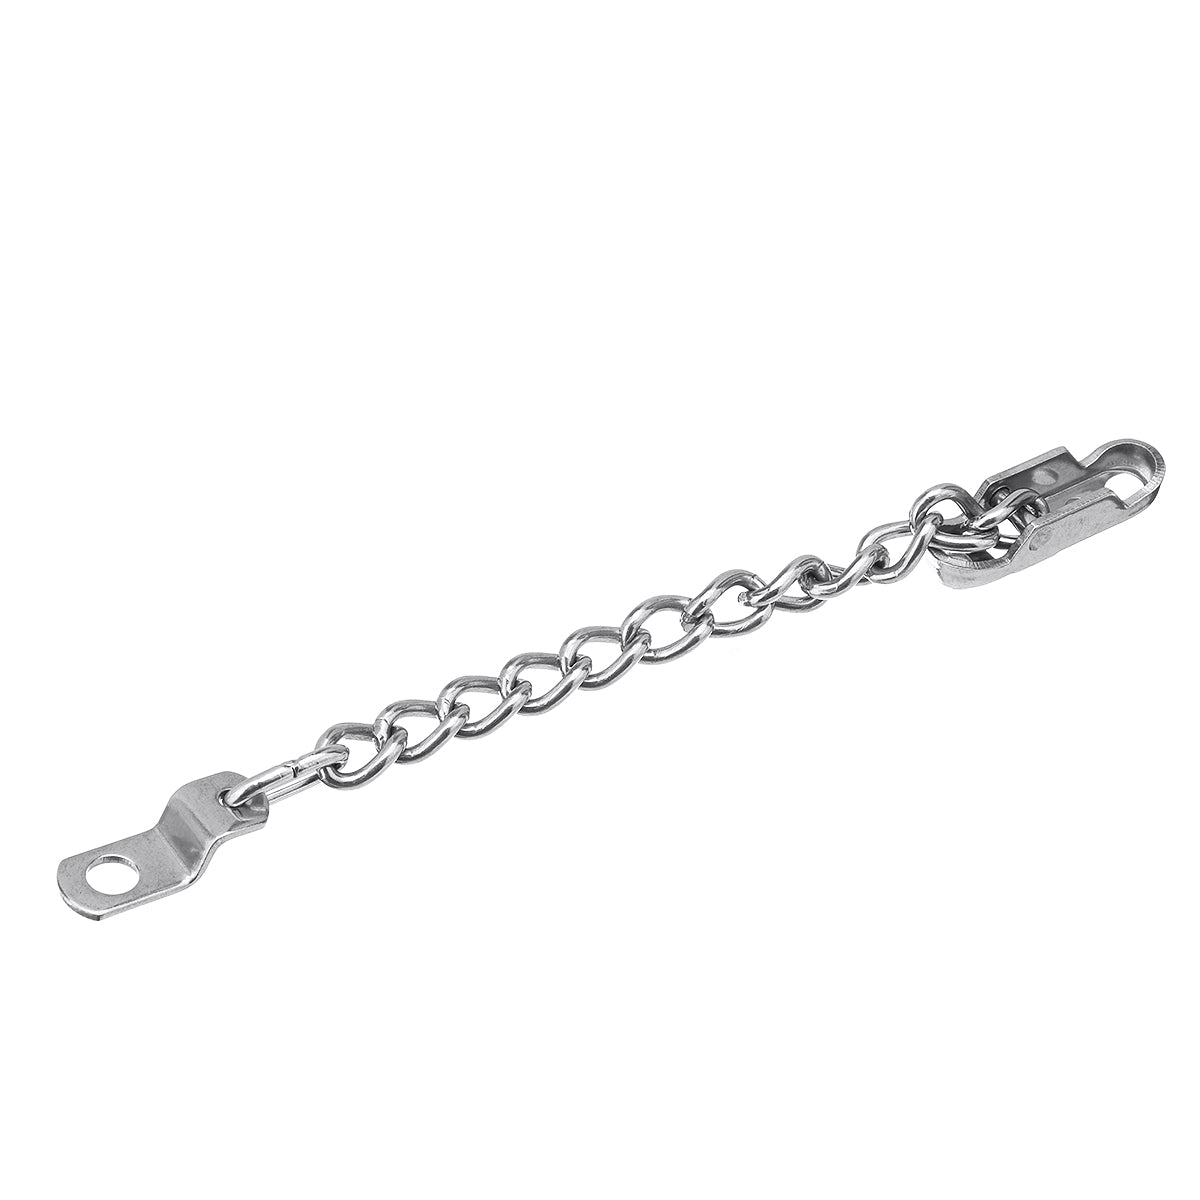 BW-P10 Stainless Steel Key Door High Security Safety Guard Restrictor Chain Door Lock